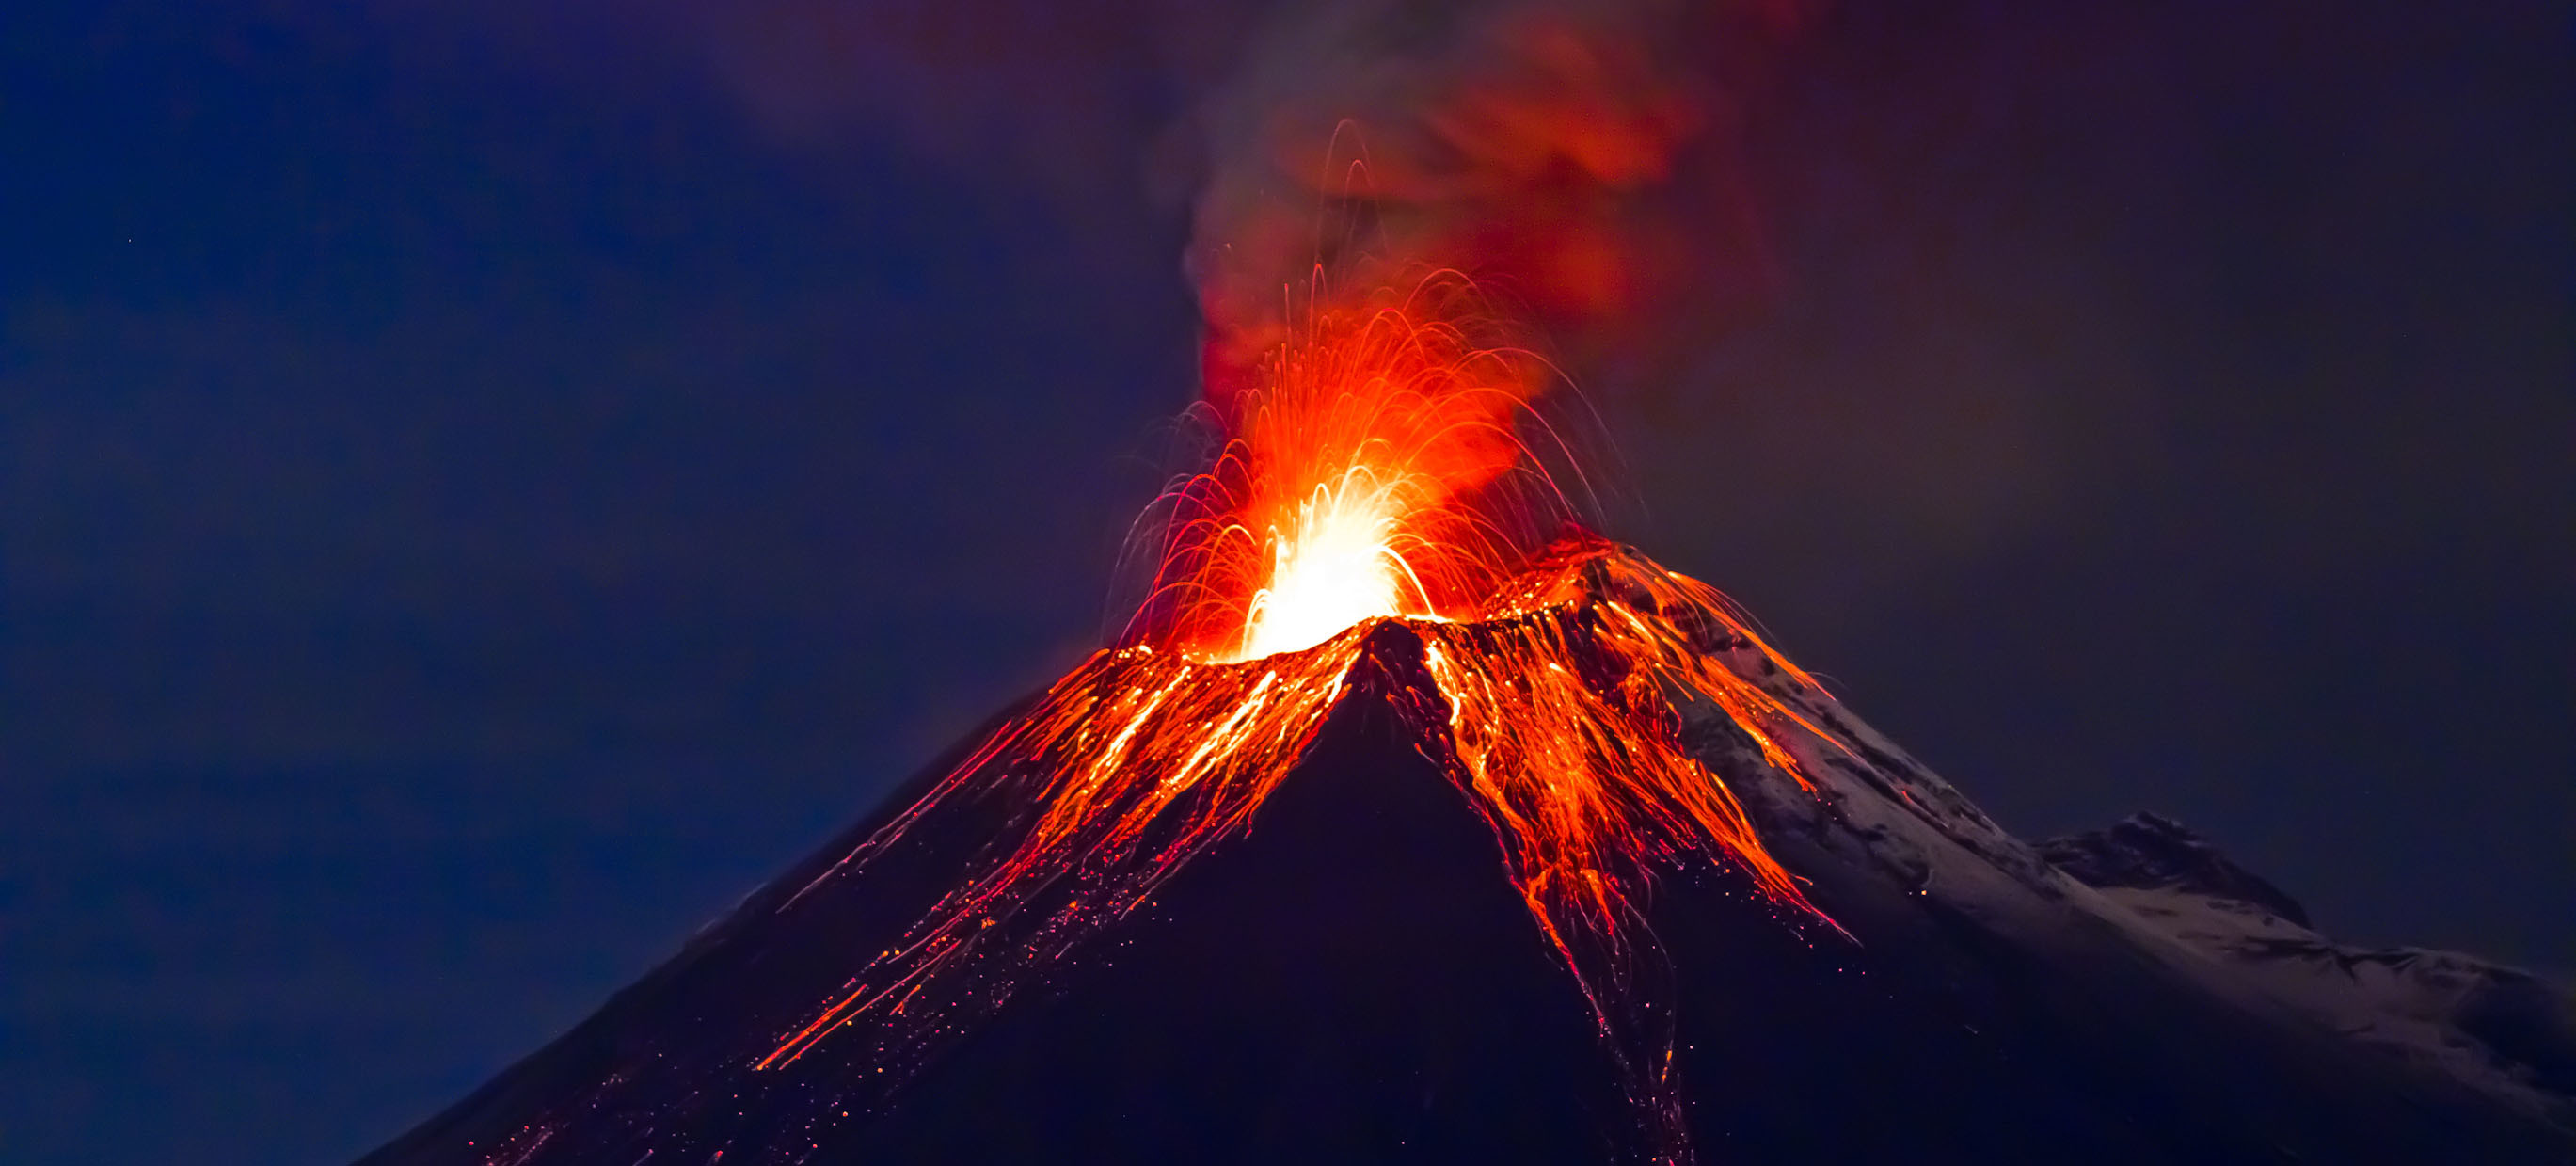 Volcano Photos Download The BEST Free Volcano Stock Photos  HD Images